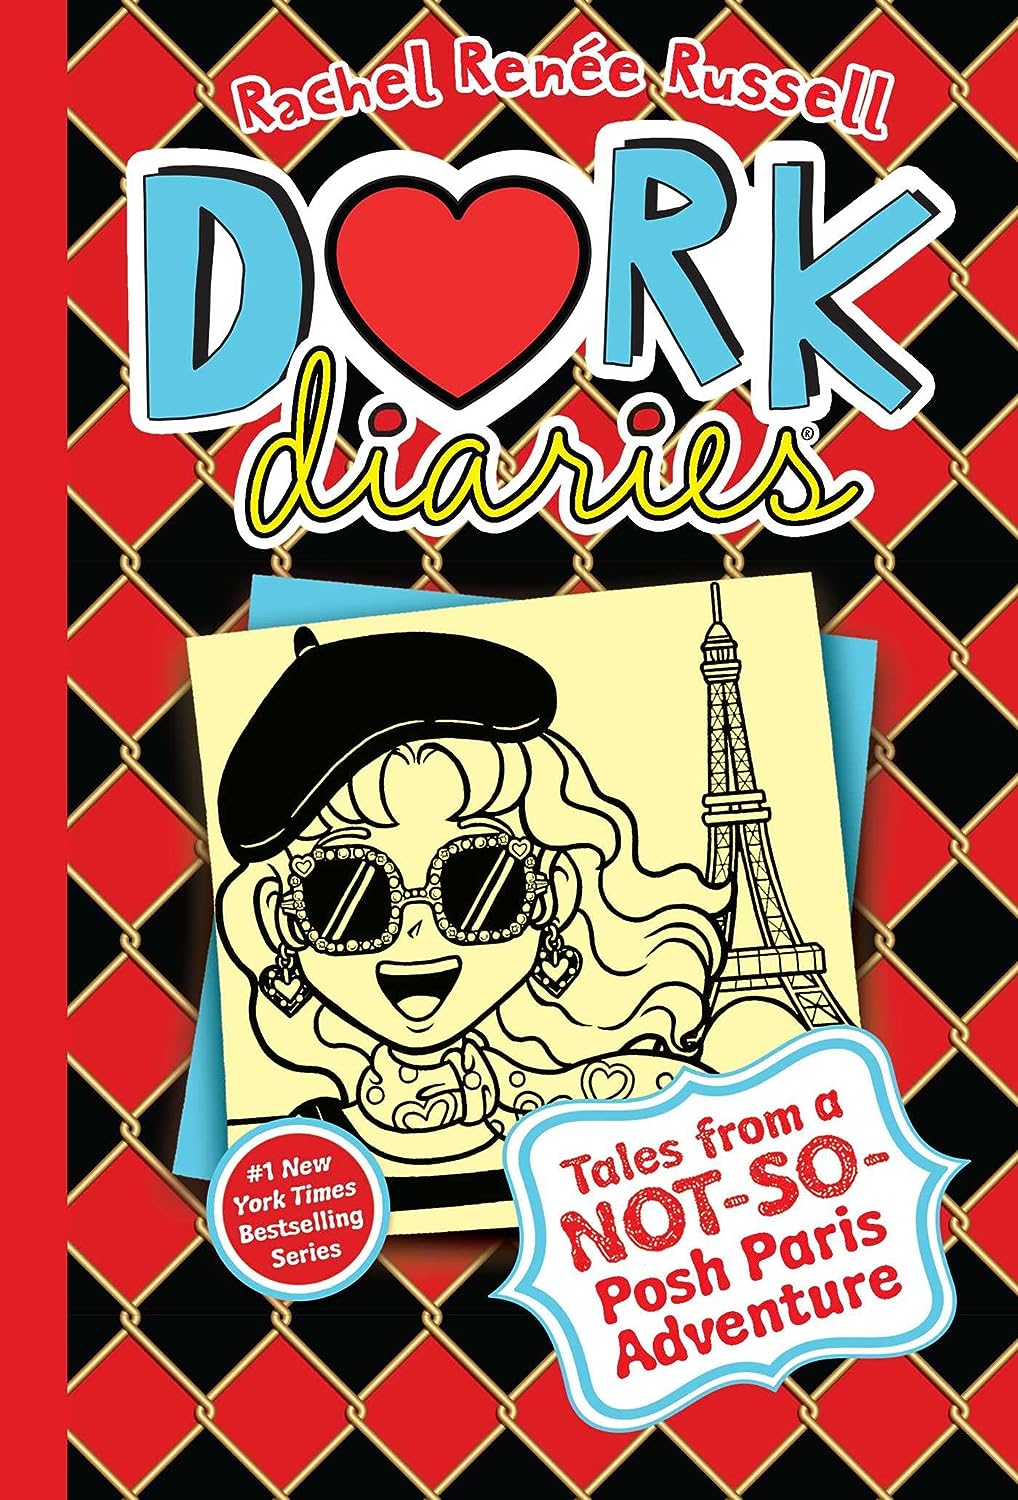 Image for "Dork Diaries 15, Volume 15: Tales from a Not-So-Posh Paris Adventure"